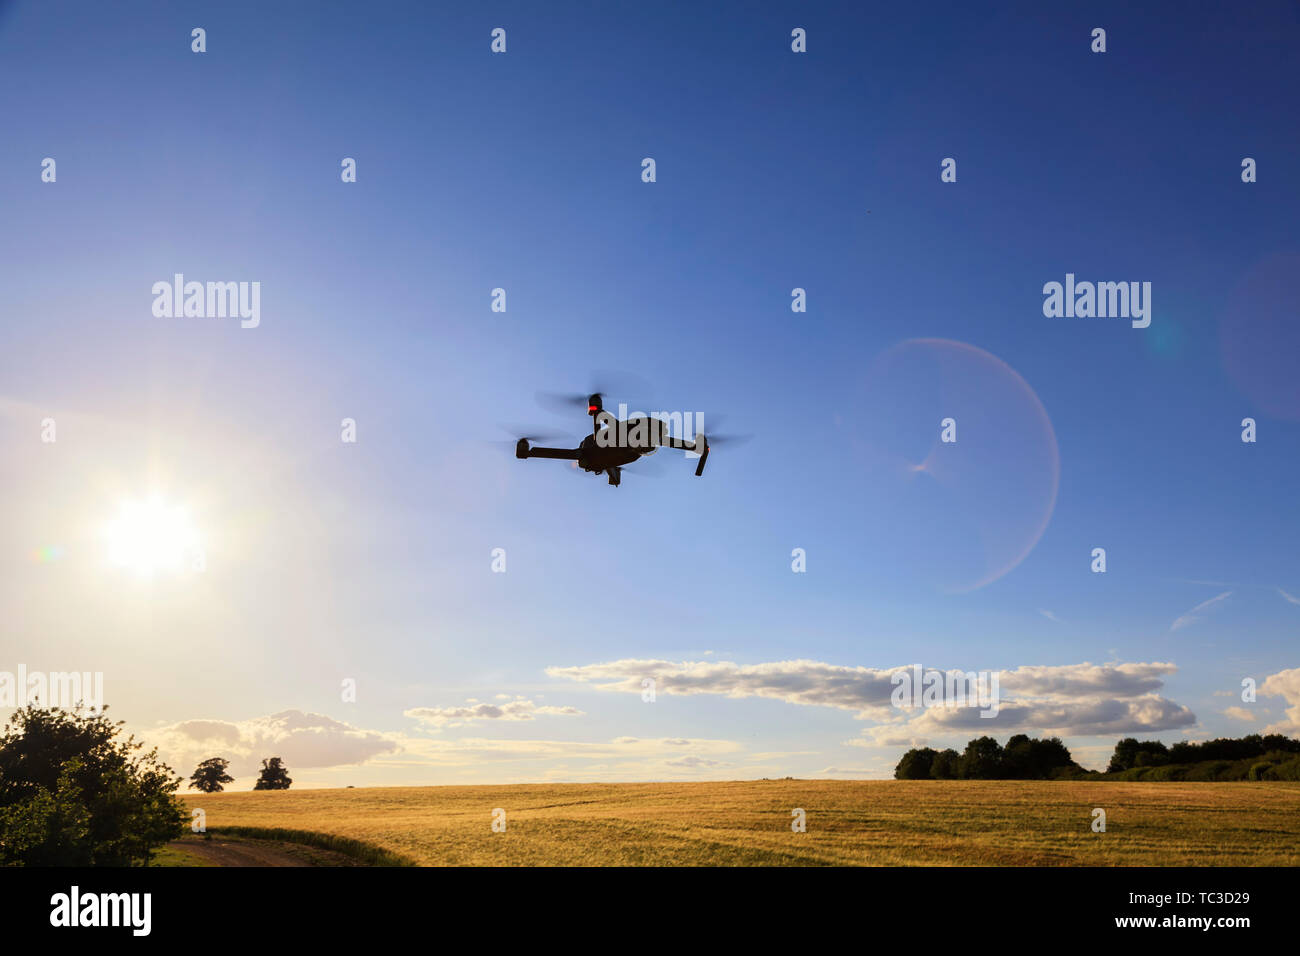 Flying drone above the wheat field. Drone in the air Stock Photo